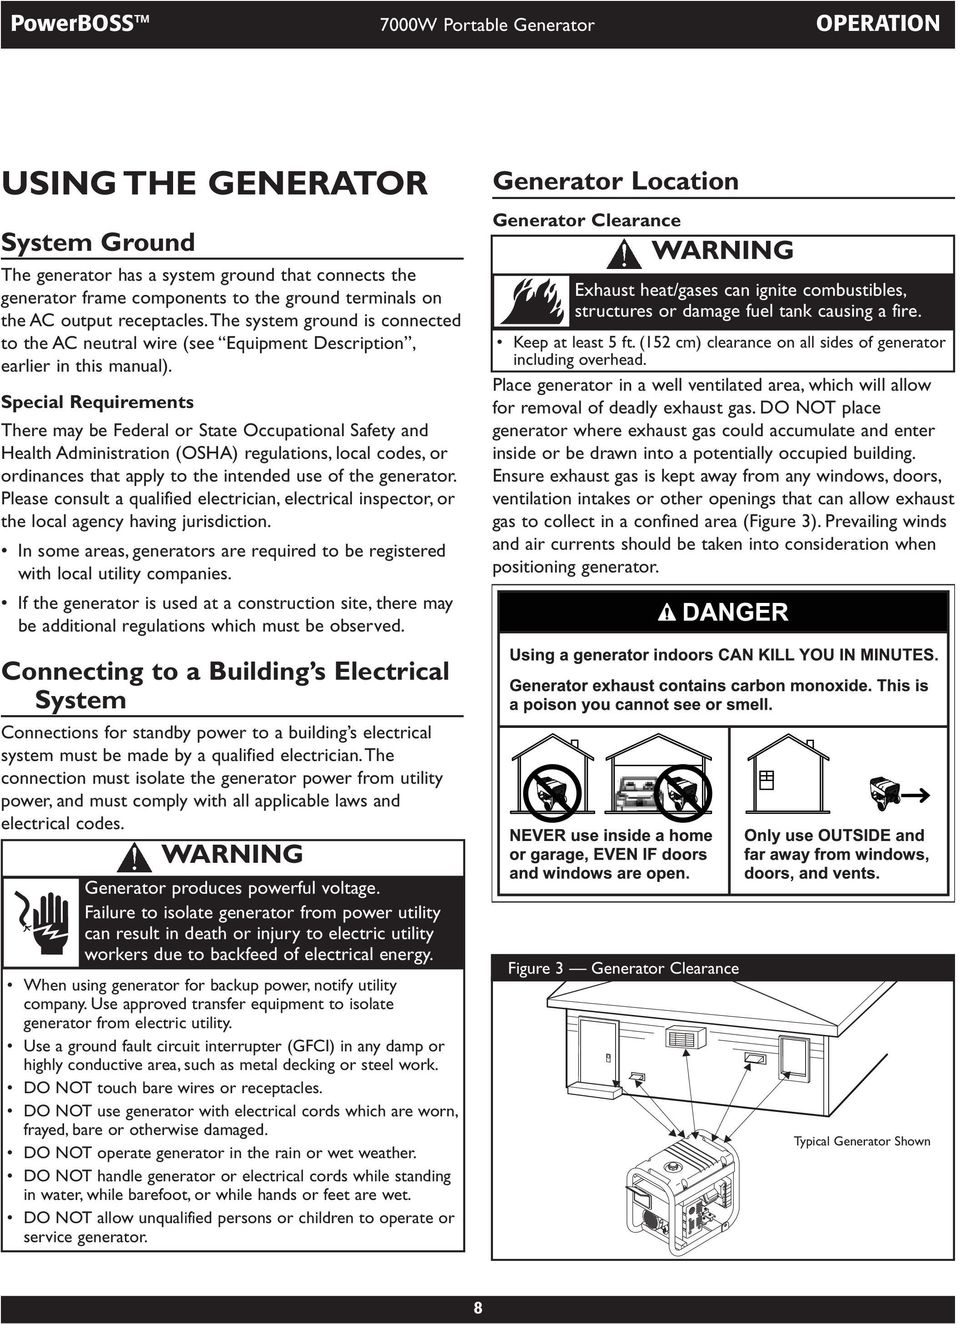 Special Requirements There may be Federal or State Occupational Safety and Health Administration (OSHA) regulations, local codes, or ordinances that apply to the intended use of the generator.